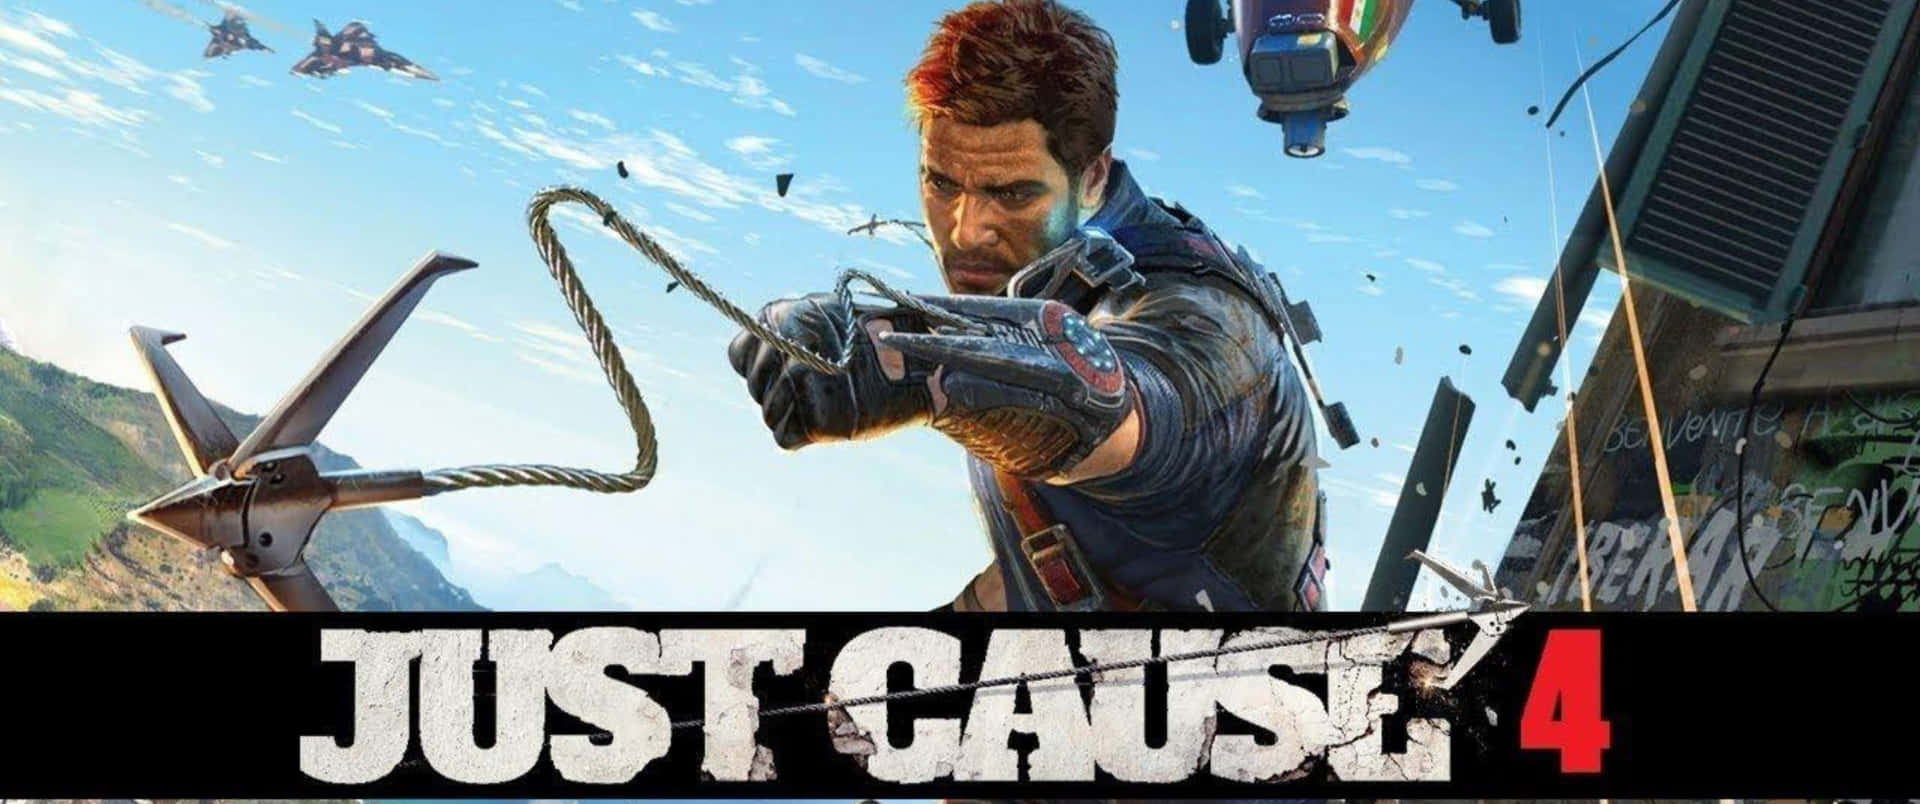 3440x1440p Just Cause 4 Official Game Poster Background